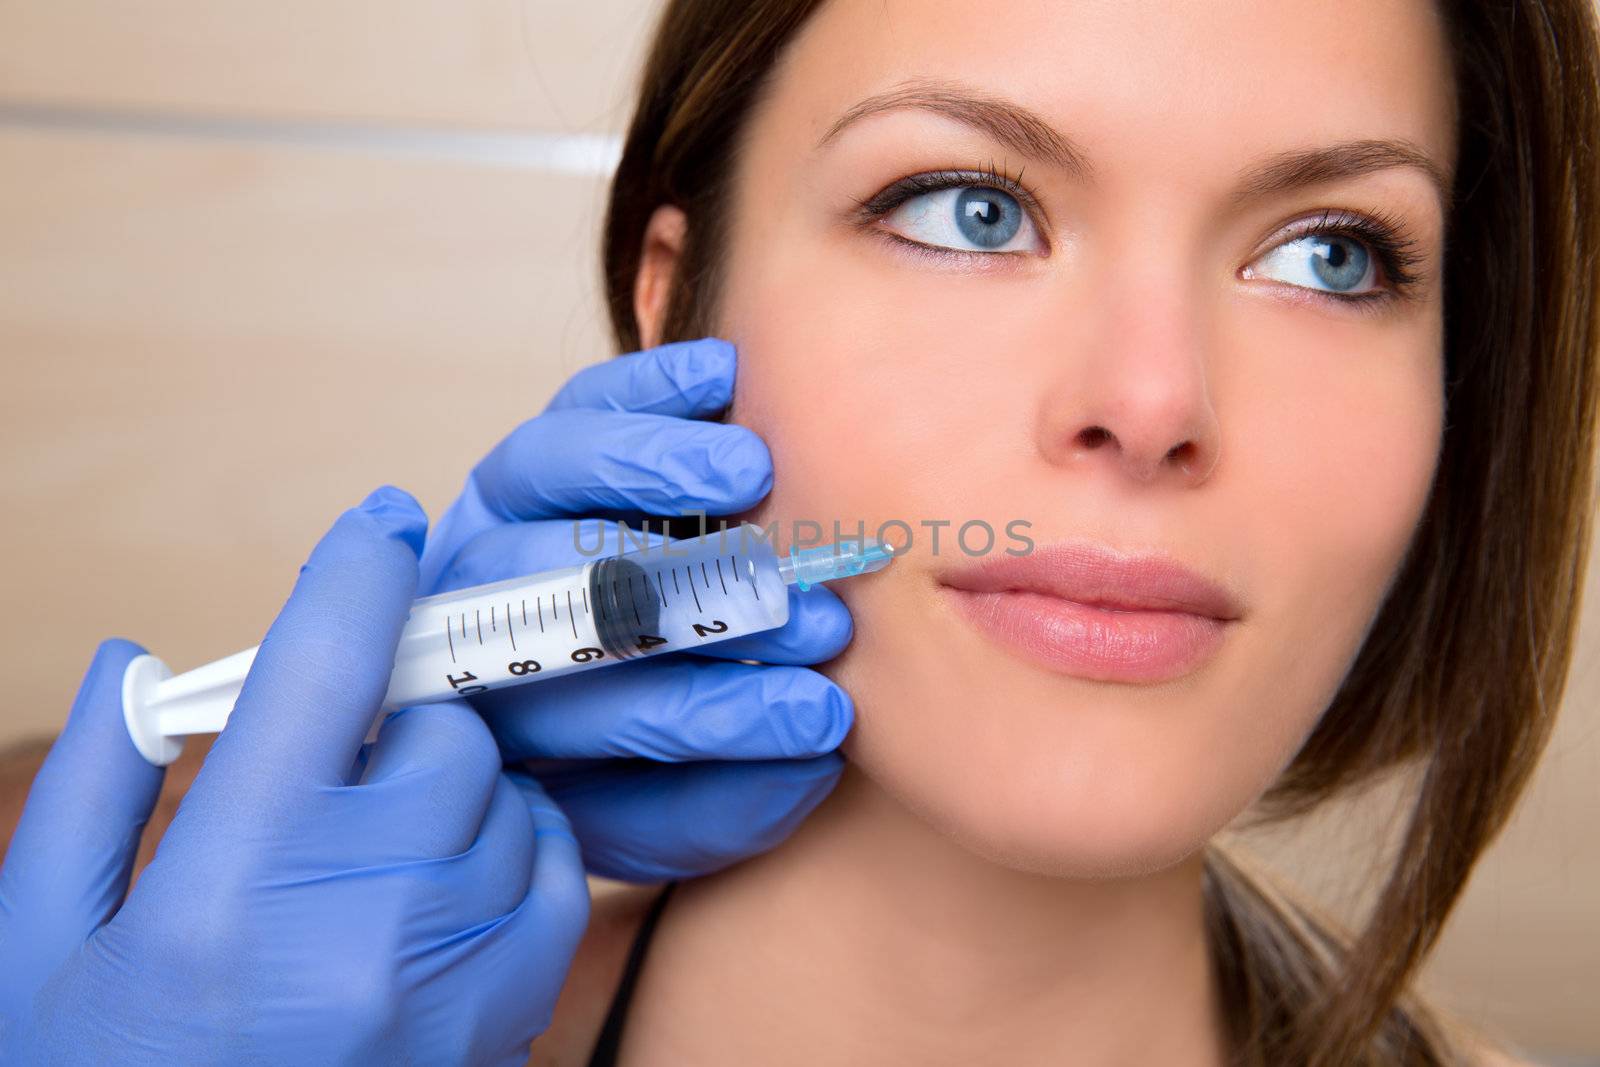 Anti aging facial mesotherapy with syringe closeup woman face by lunamarina